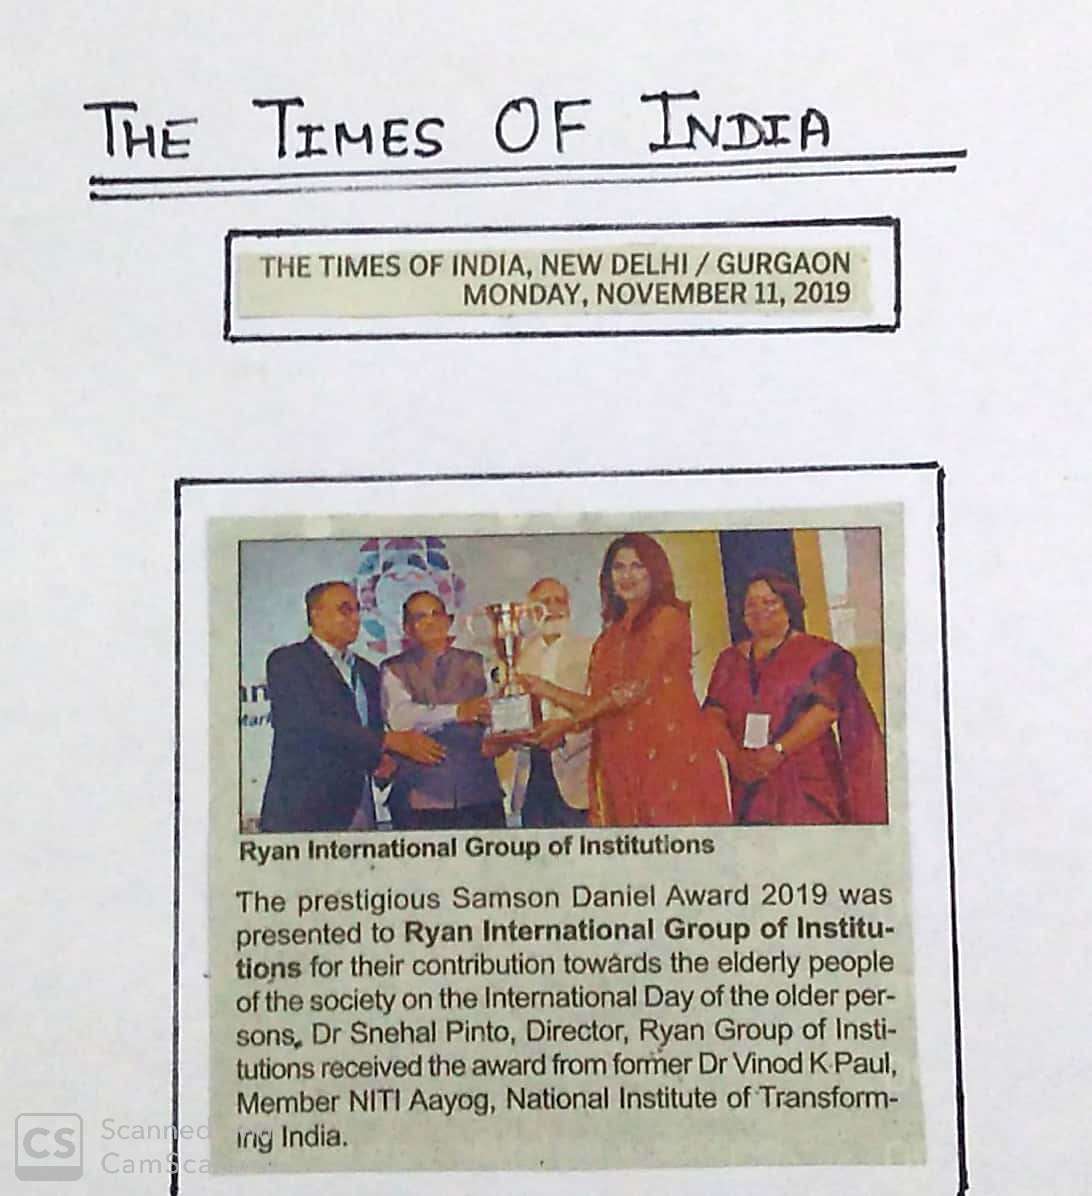 Ryan International Group of Institutions was presented the Samson Daniel Award 2019 for their contribution towards the elderly people of the society - Ryan International School, Sec 31 Gurgaon